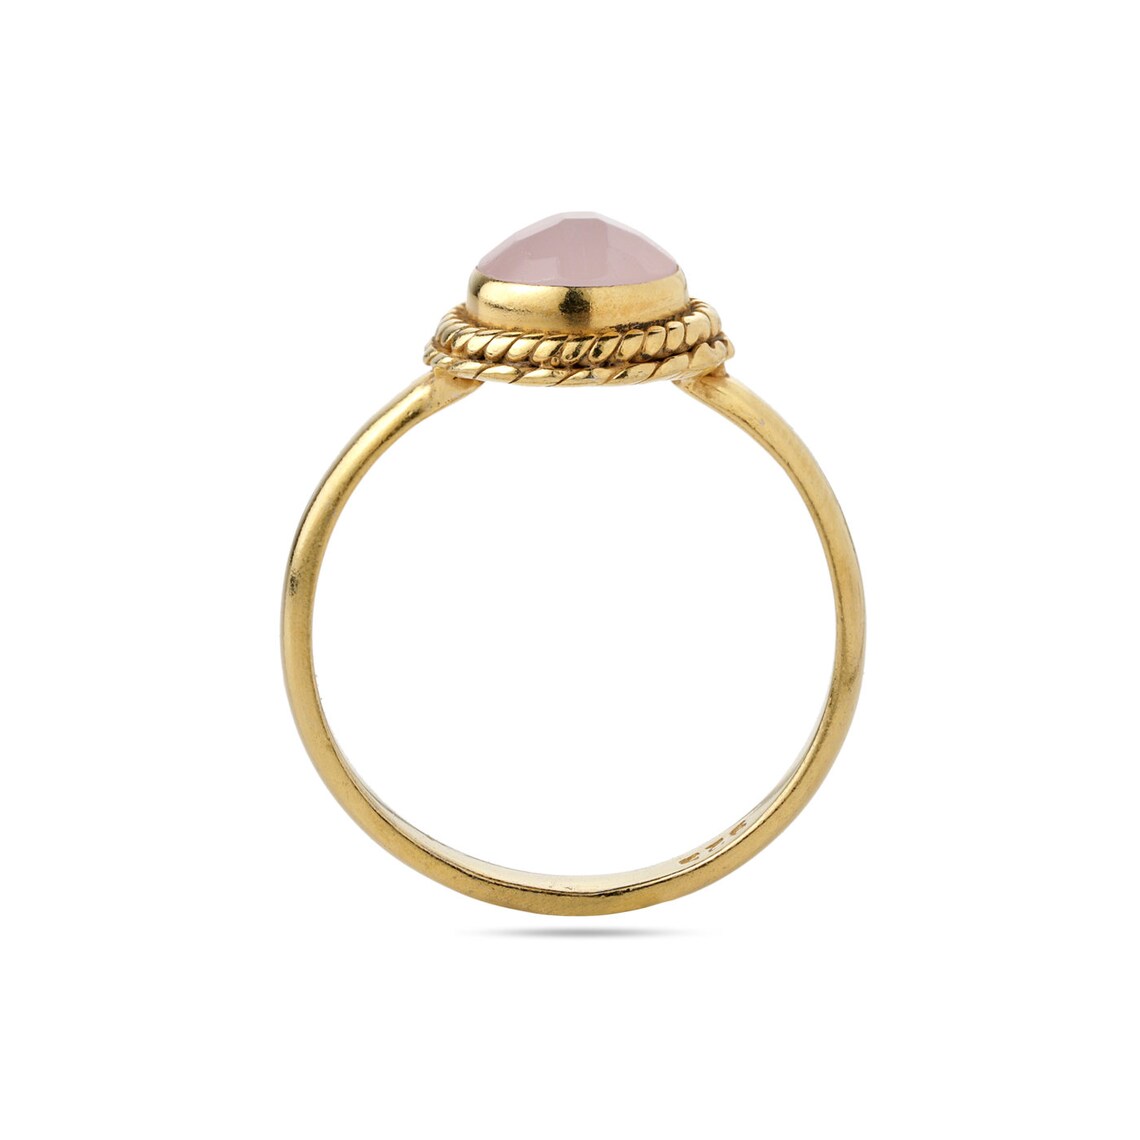 Pink Chalcedony Ring, 925 Sterling Silver Round Chalcedony Gold Ring